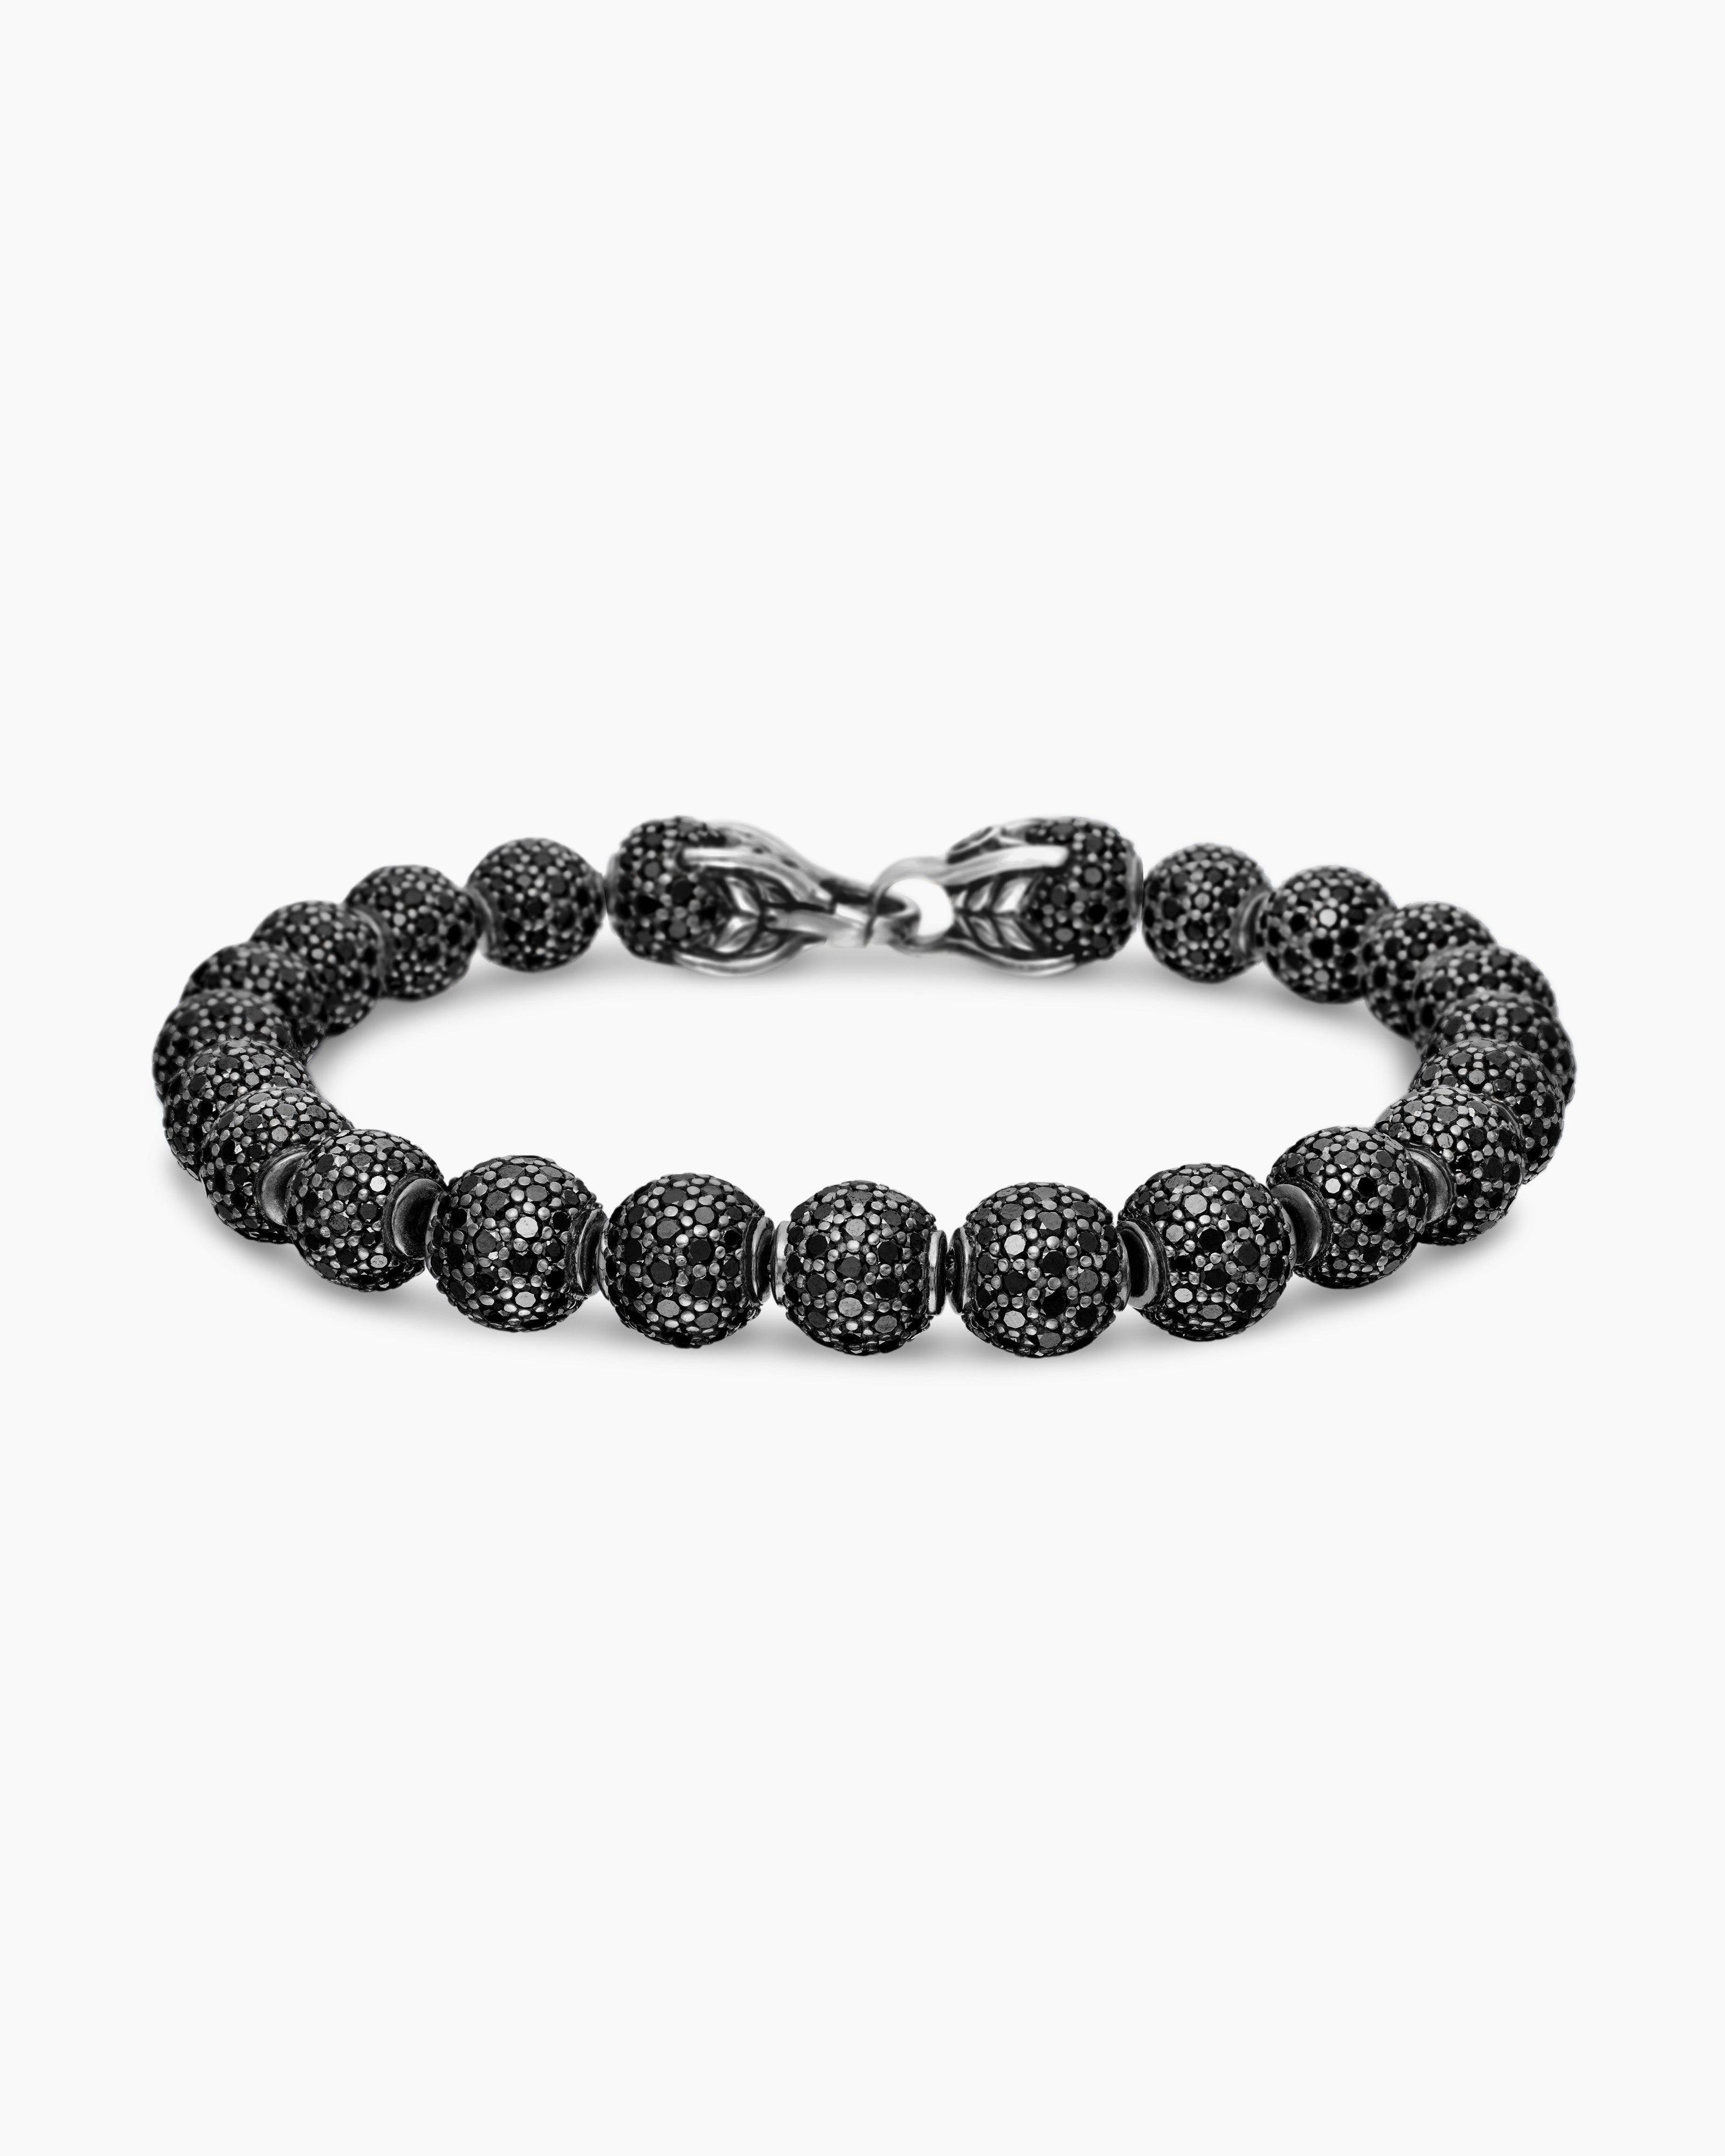 Black Bead Bracelet: Spiritual Meaning & Traditions (Facts)  Black beaded  bracelets, Black beads, Bracelets with meaning